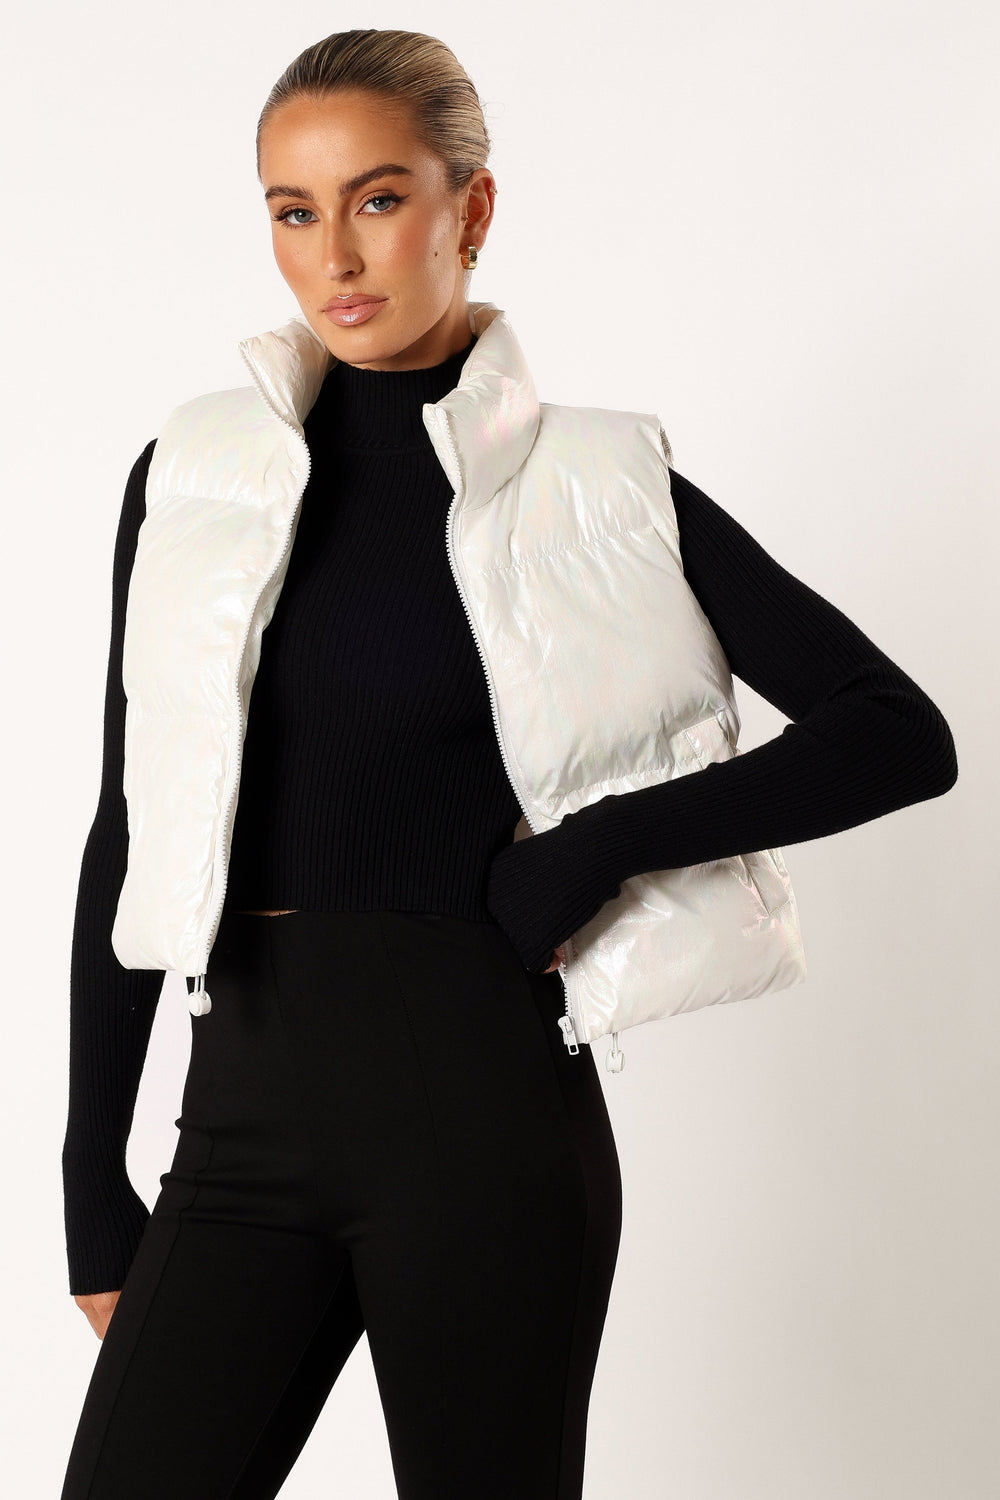 OUTERWEAR @Emory Puffer Vest - White